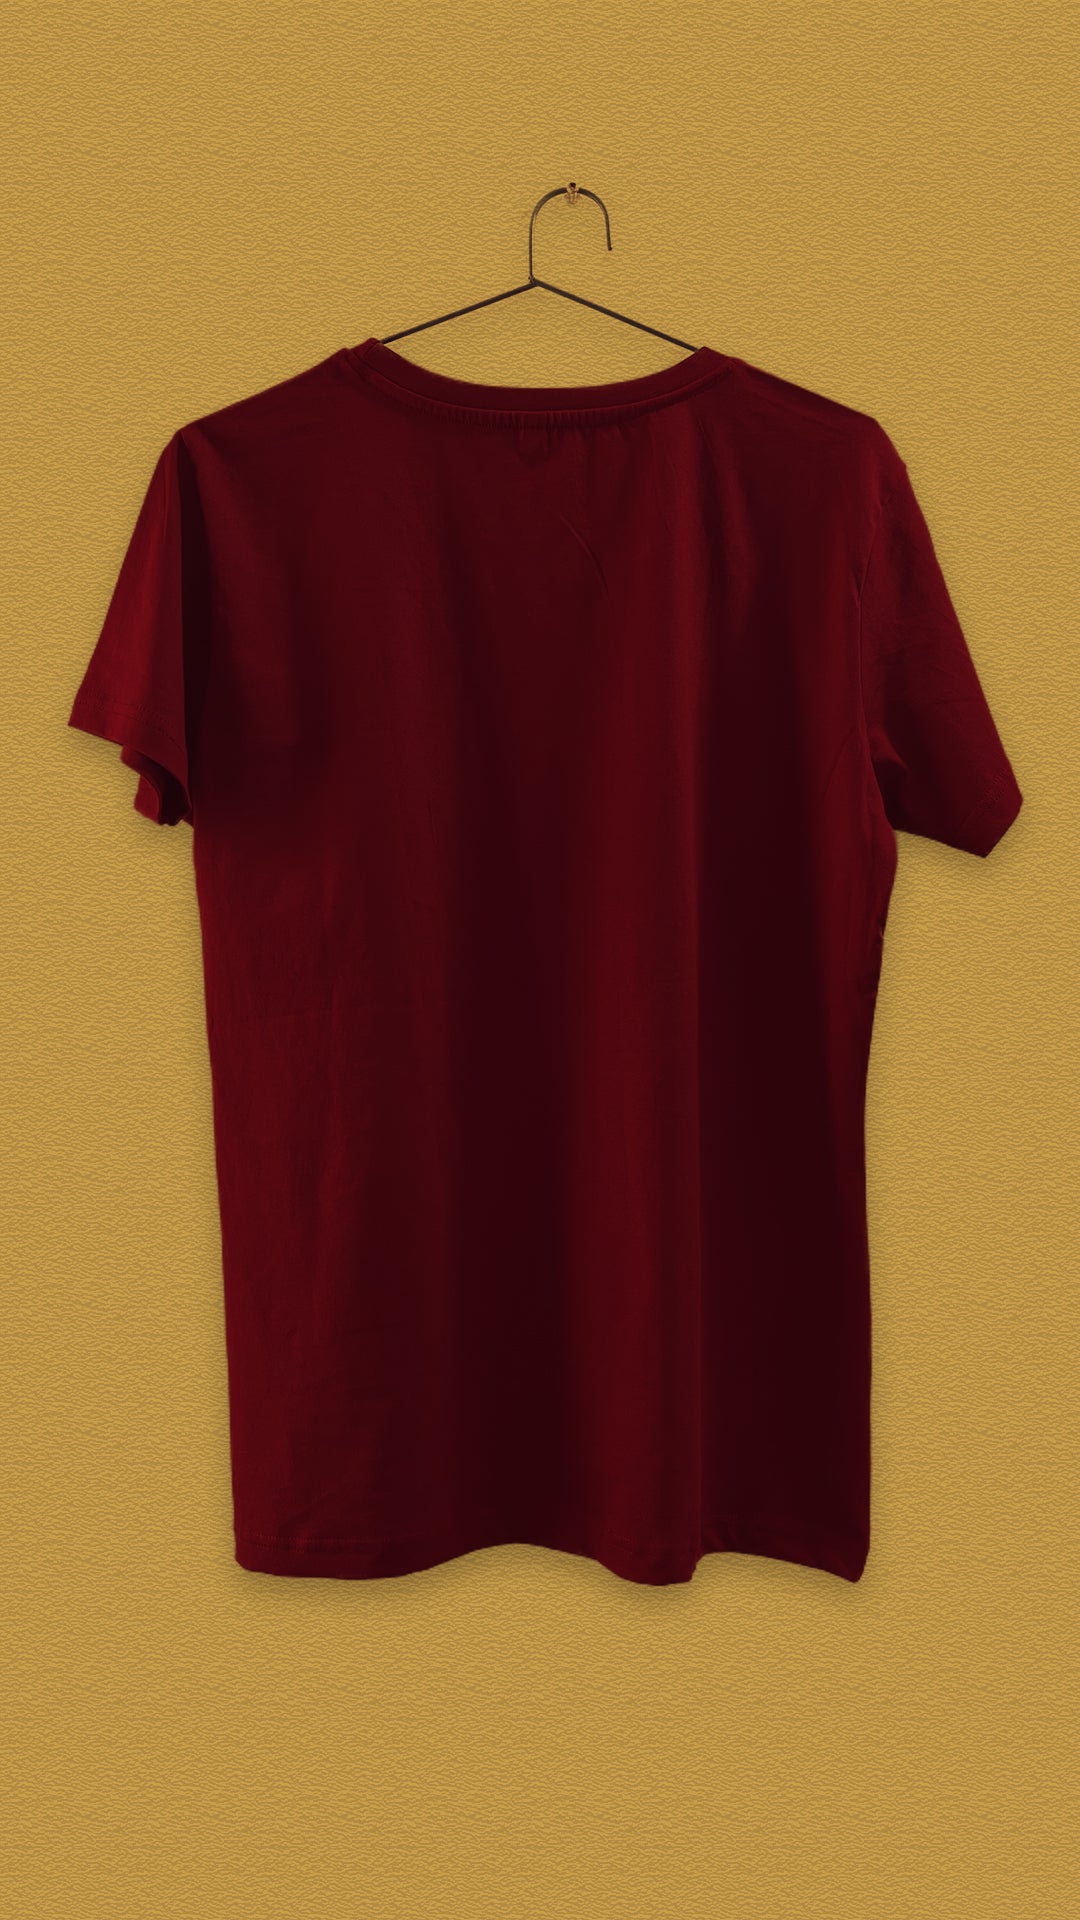 Women's Round Neck Solid Color Tee Shirt - Red